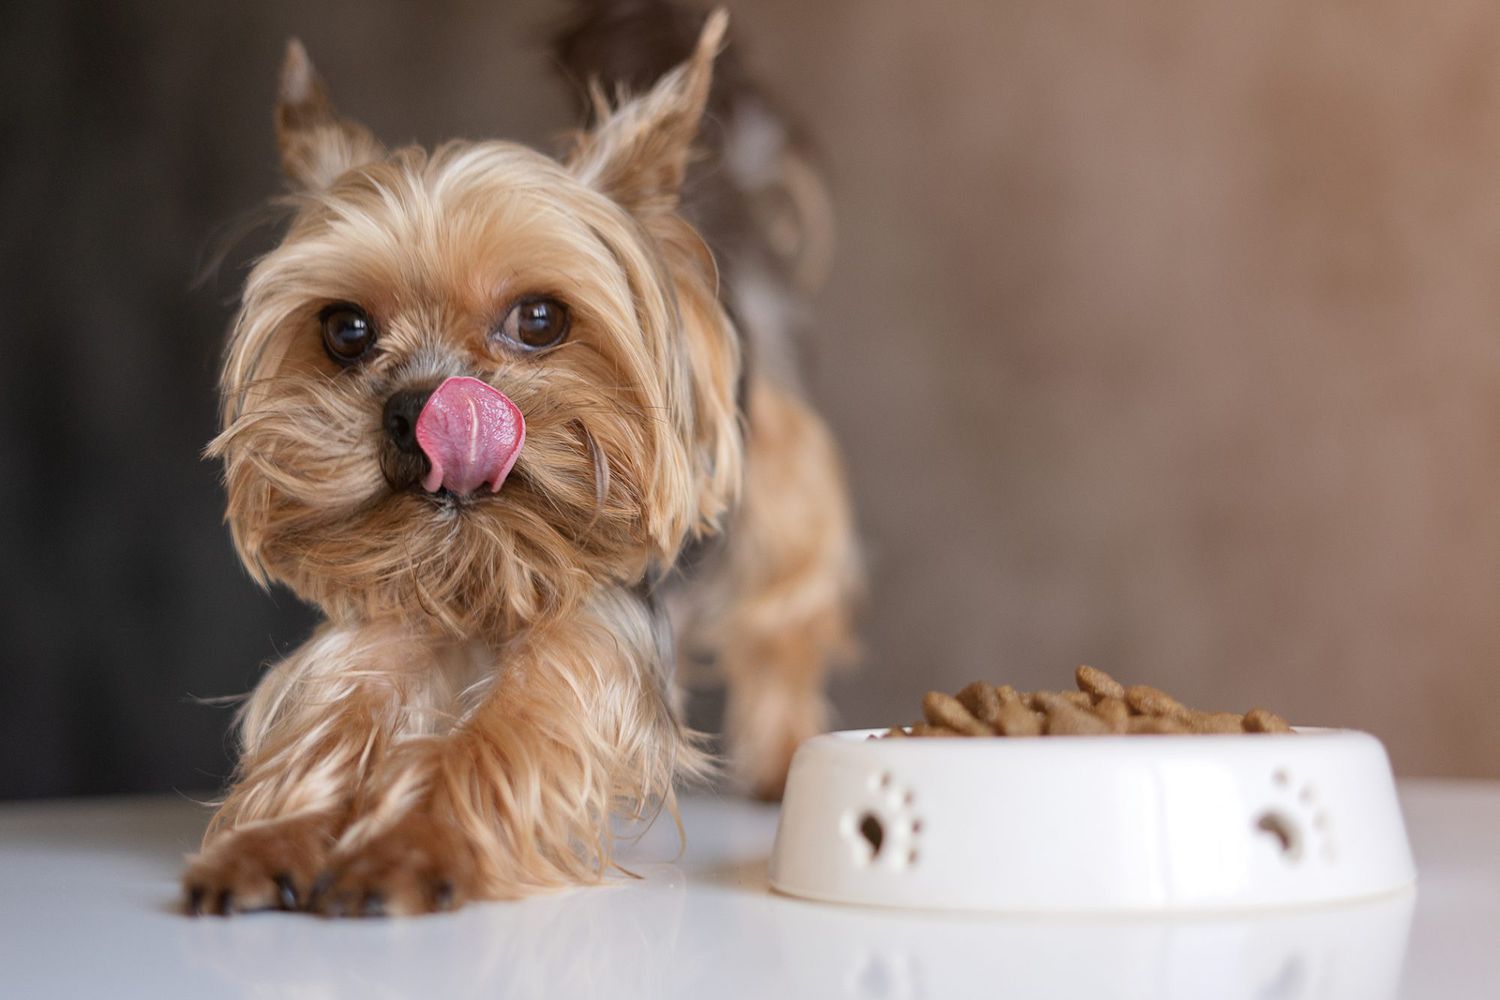 Yorkie licking lips next to bowl of food